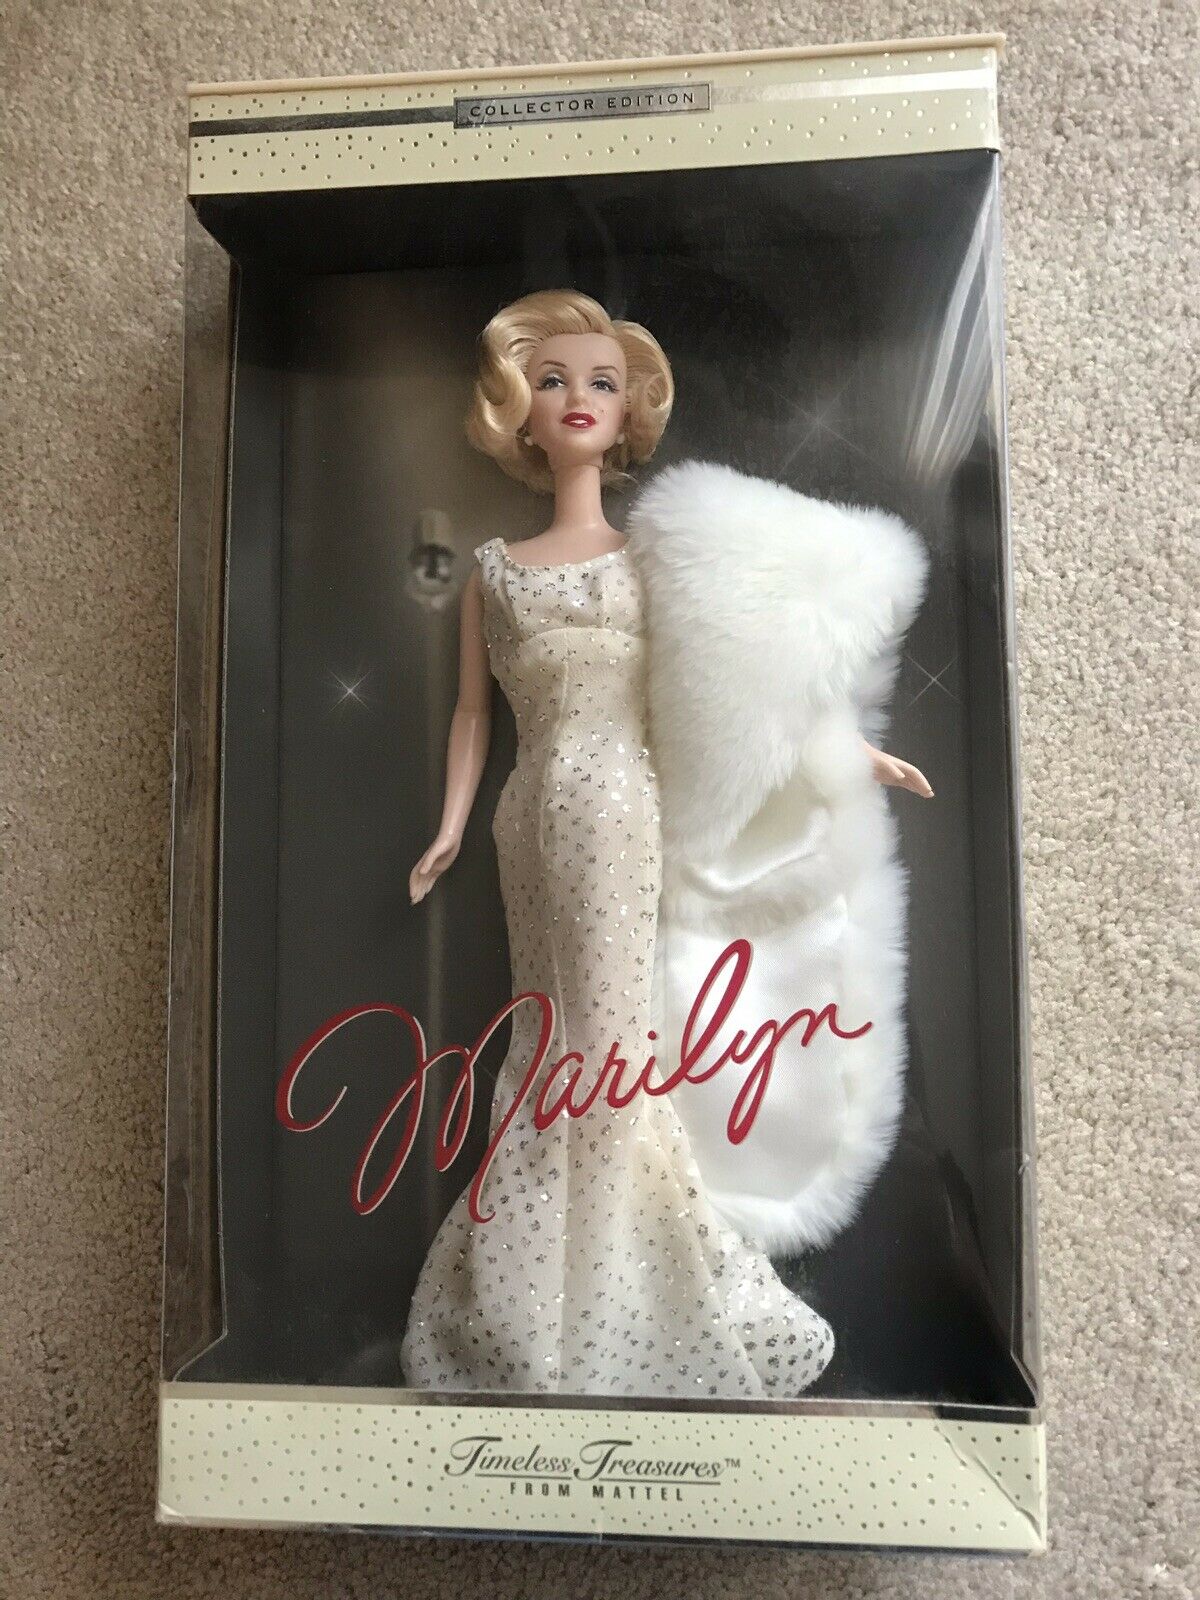 Marilyn Monroe Timeless Treasures Barbie Doll New Collectors Edition